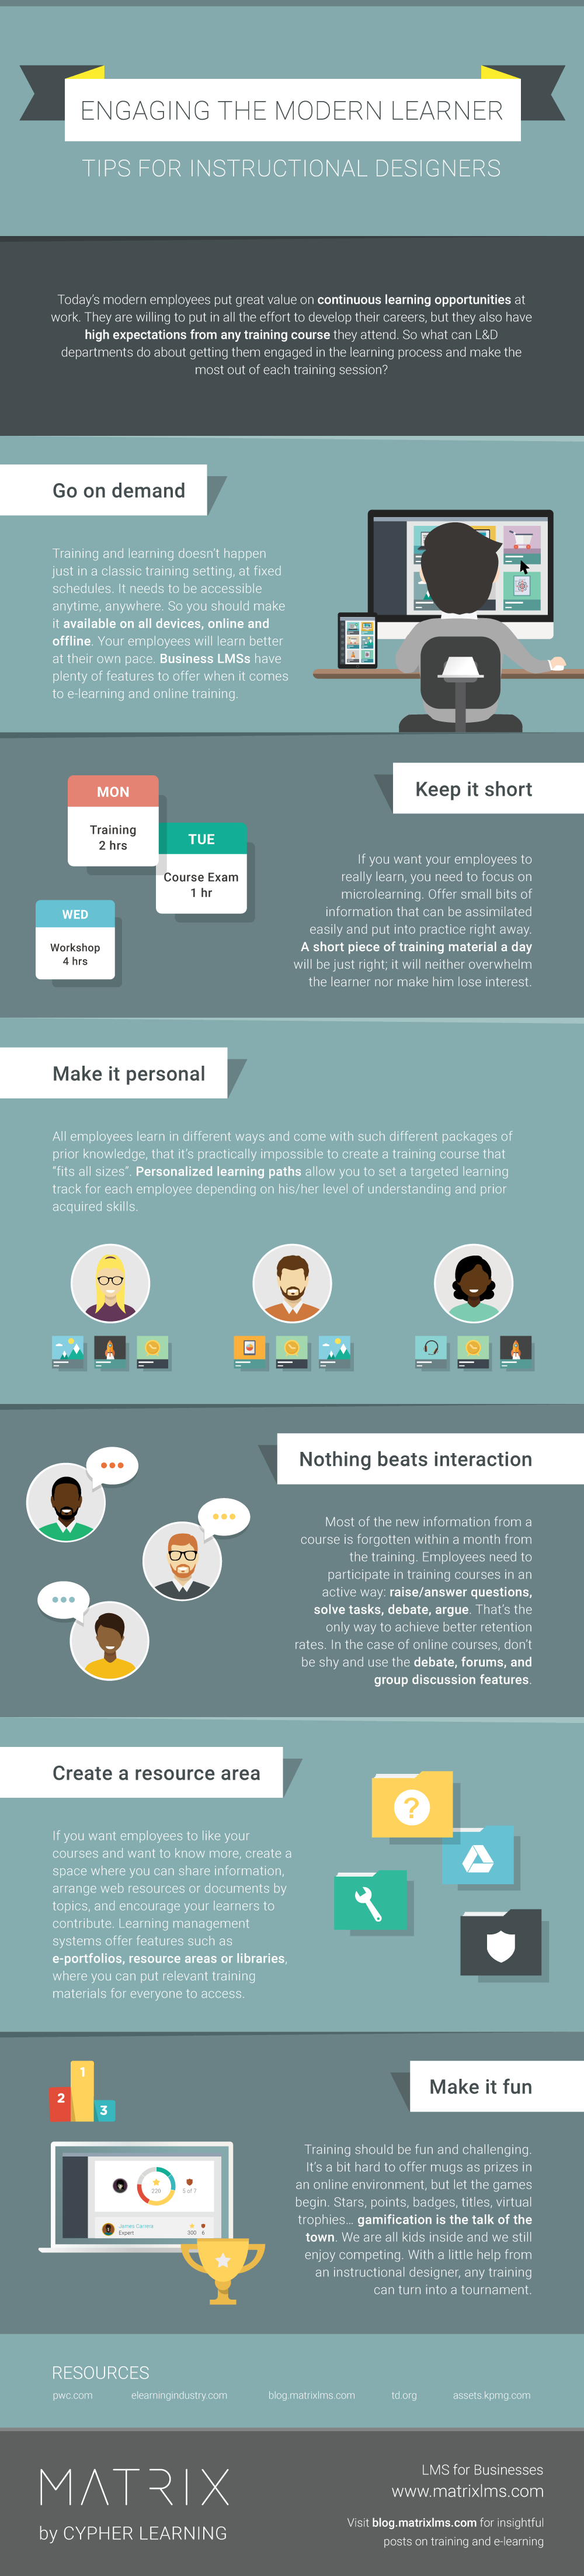 engaging-the-modern-learner Infographic